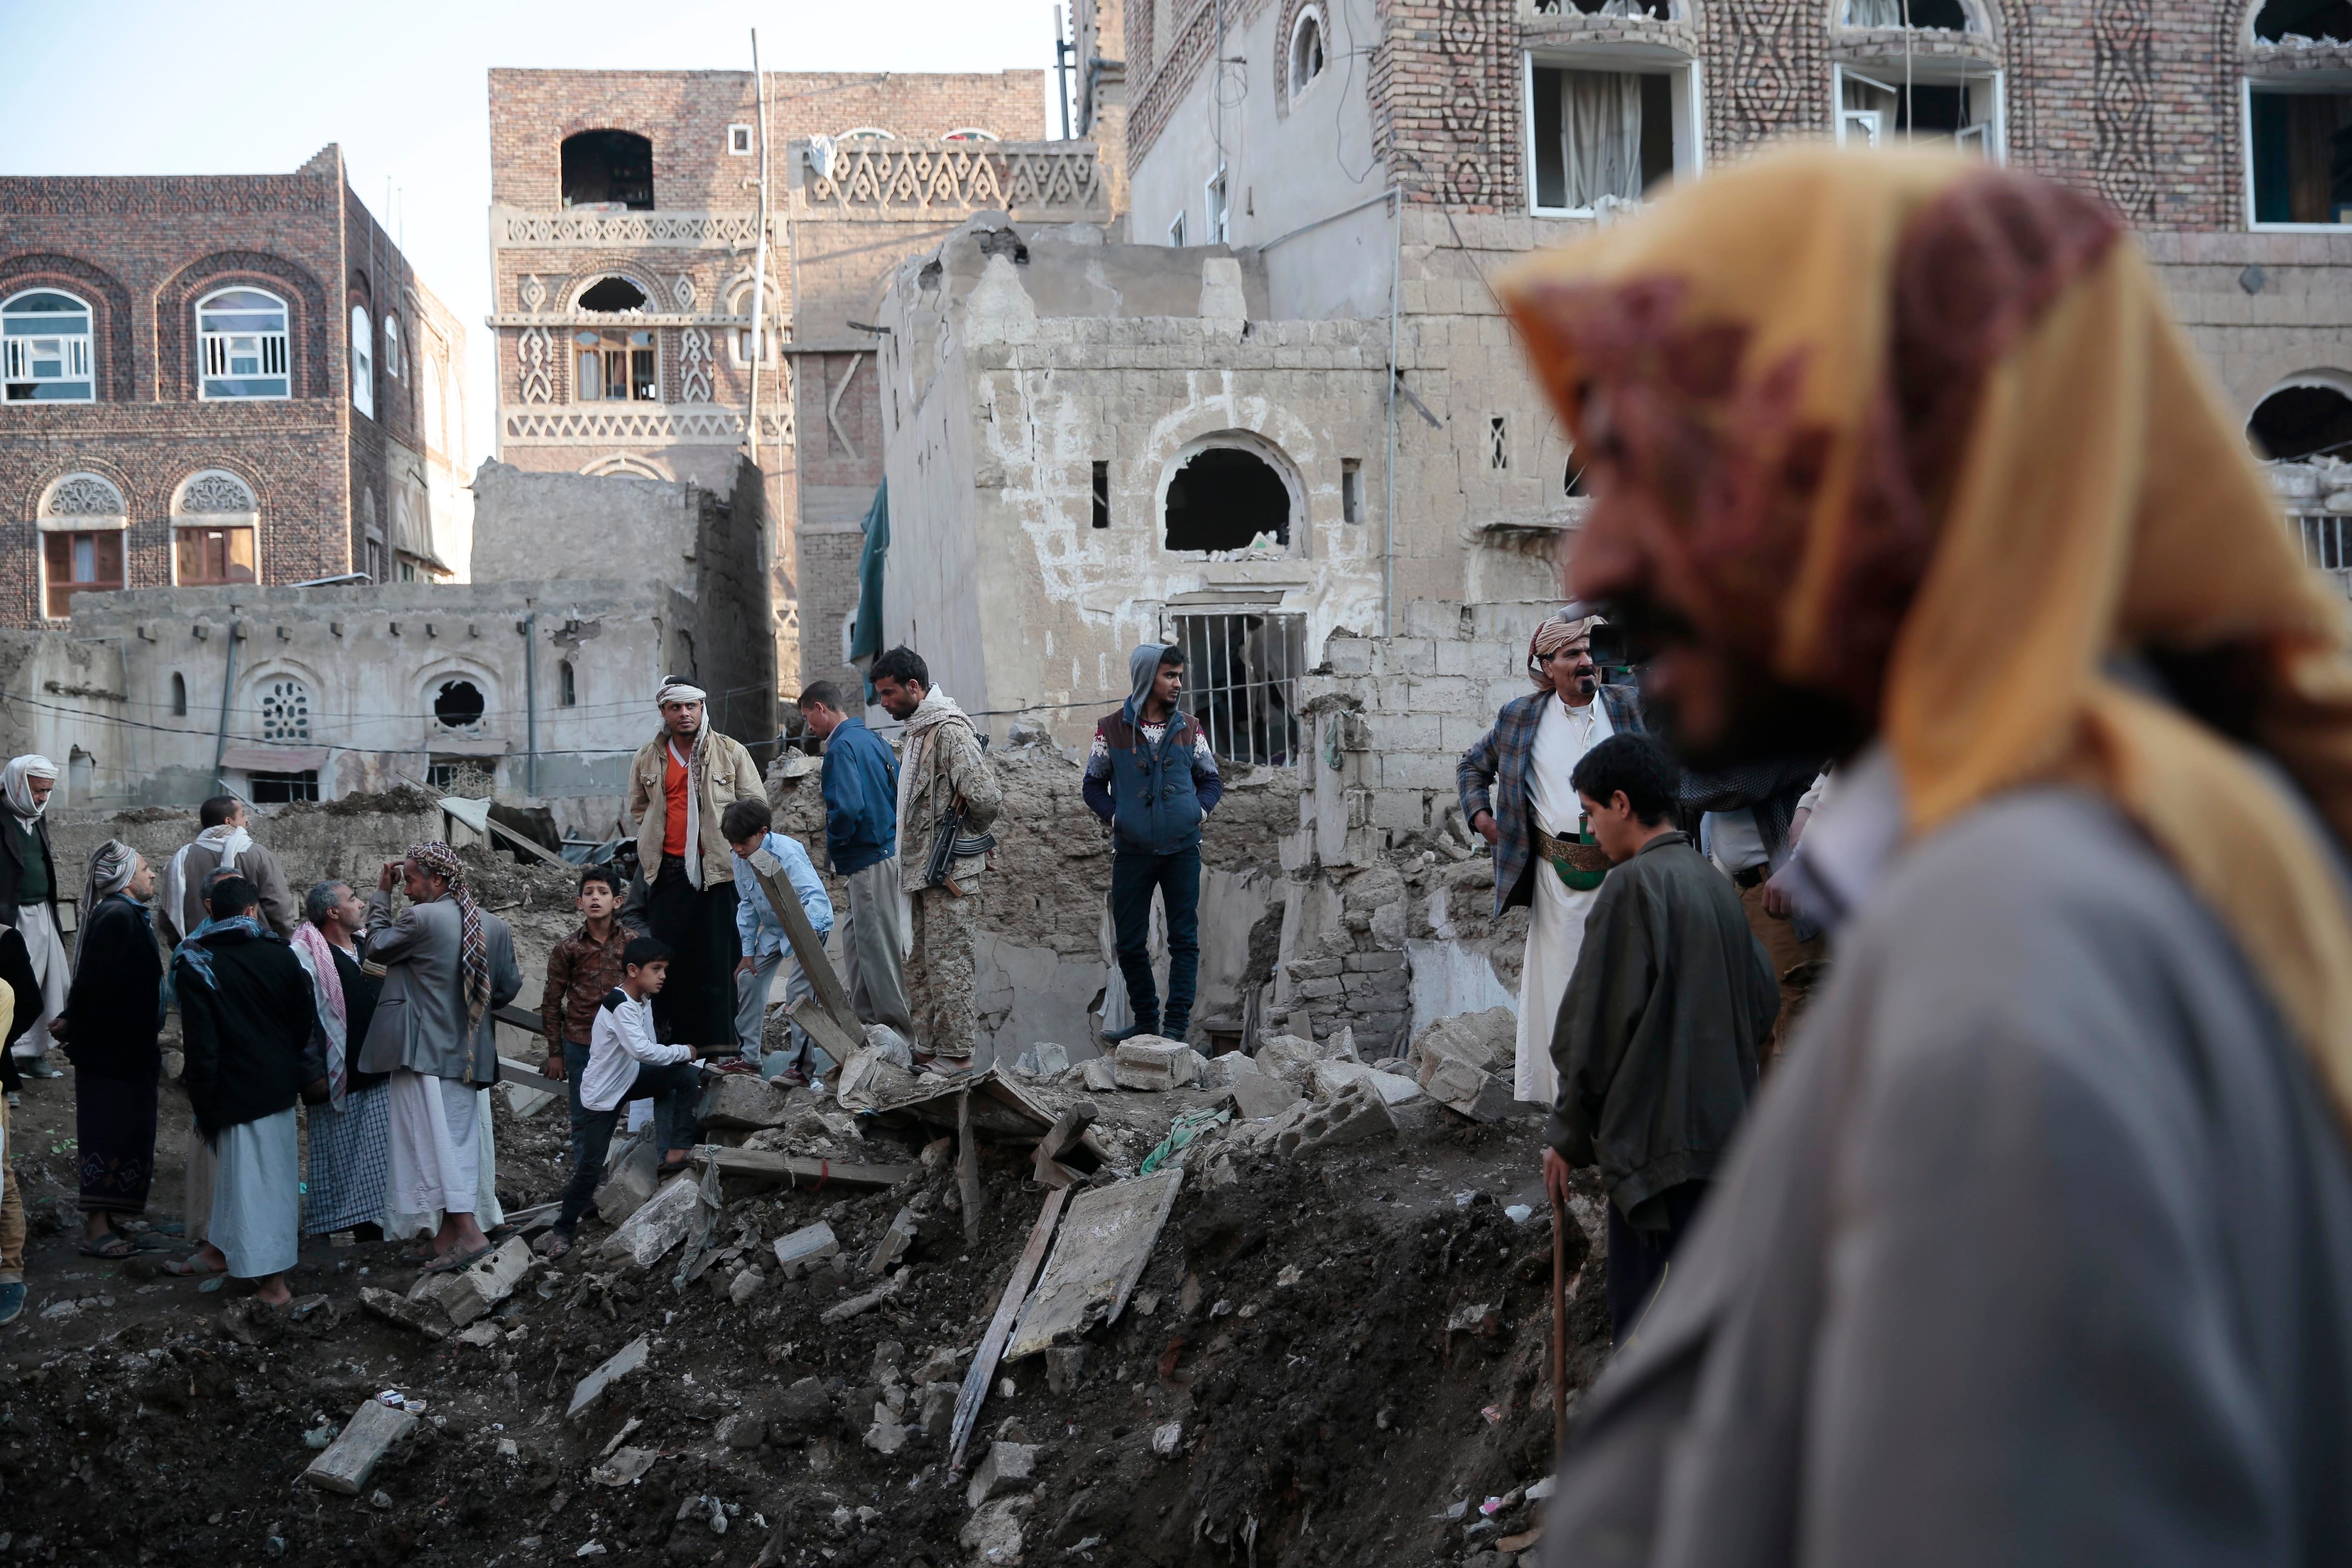 People search through the rubble of houses at the site of a Saudi-led airstrike near Yemen's Defense Ministry complex in Sanaa, Yemen, on Nov. 11, 2017. (Hani Mohammed—AP)